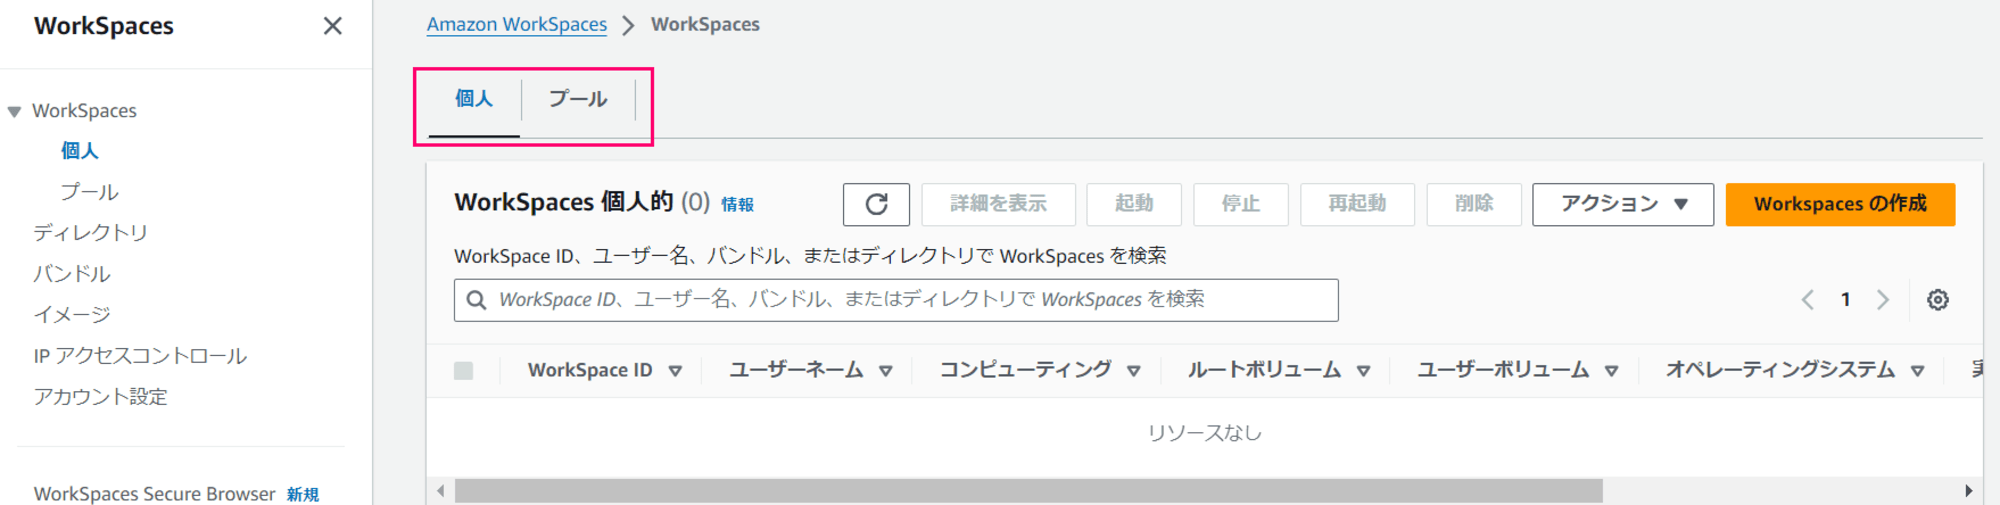 amazon-workspaces-supports-workspaces-pools-01